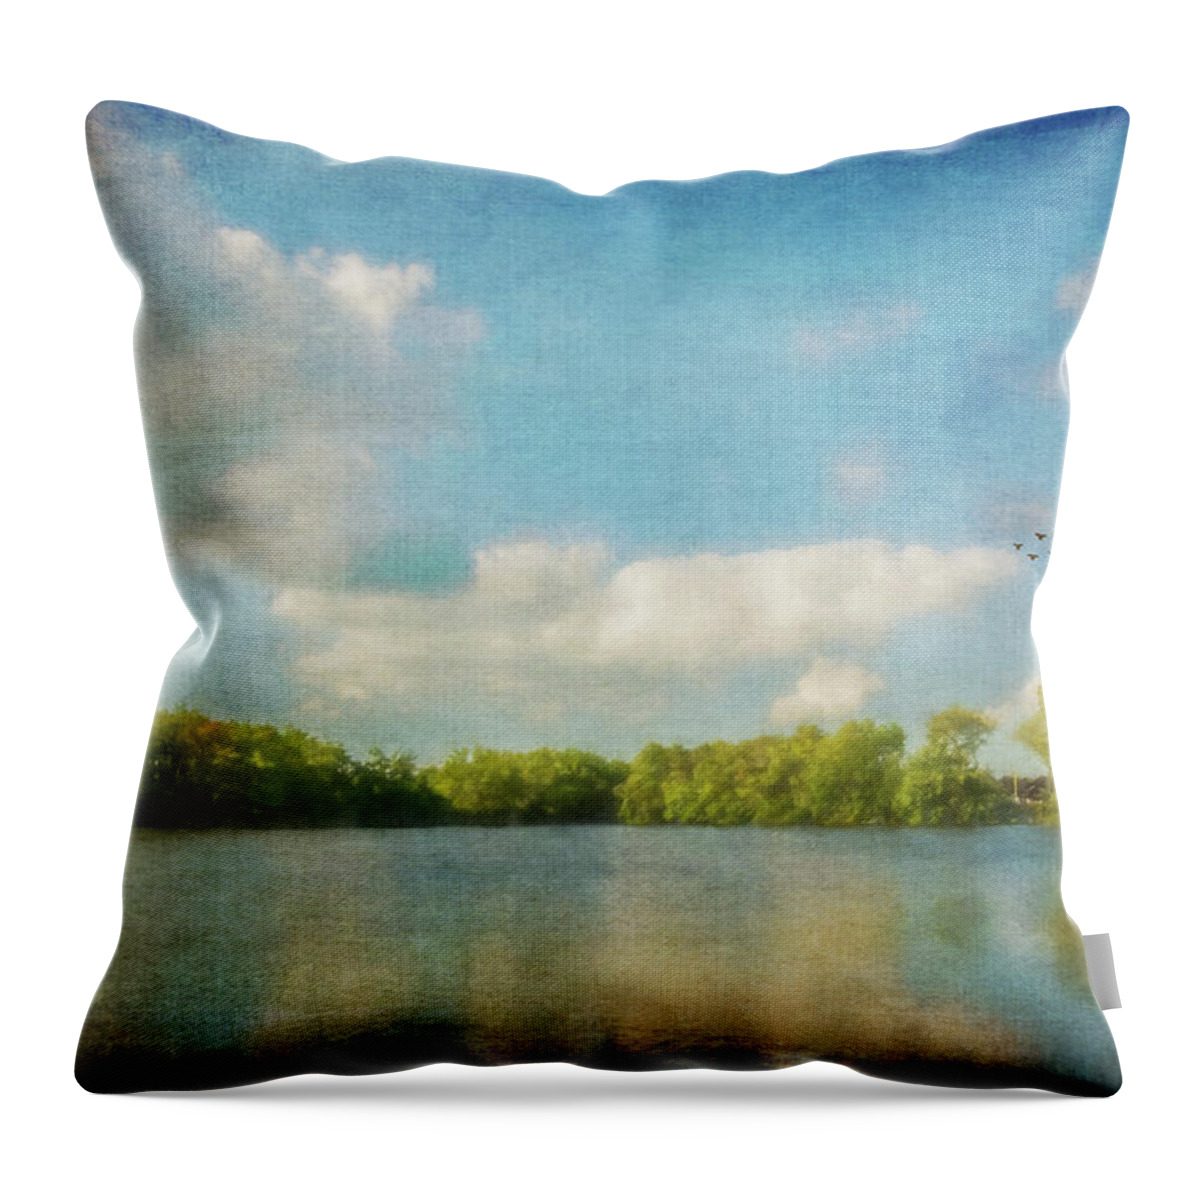 Clouds Throw Pillow featuring the photograph Clouds Over The Lake by Cathy Kovarik